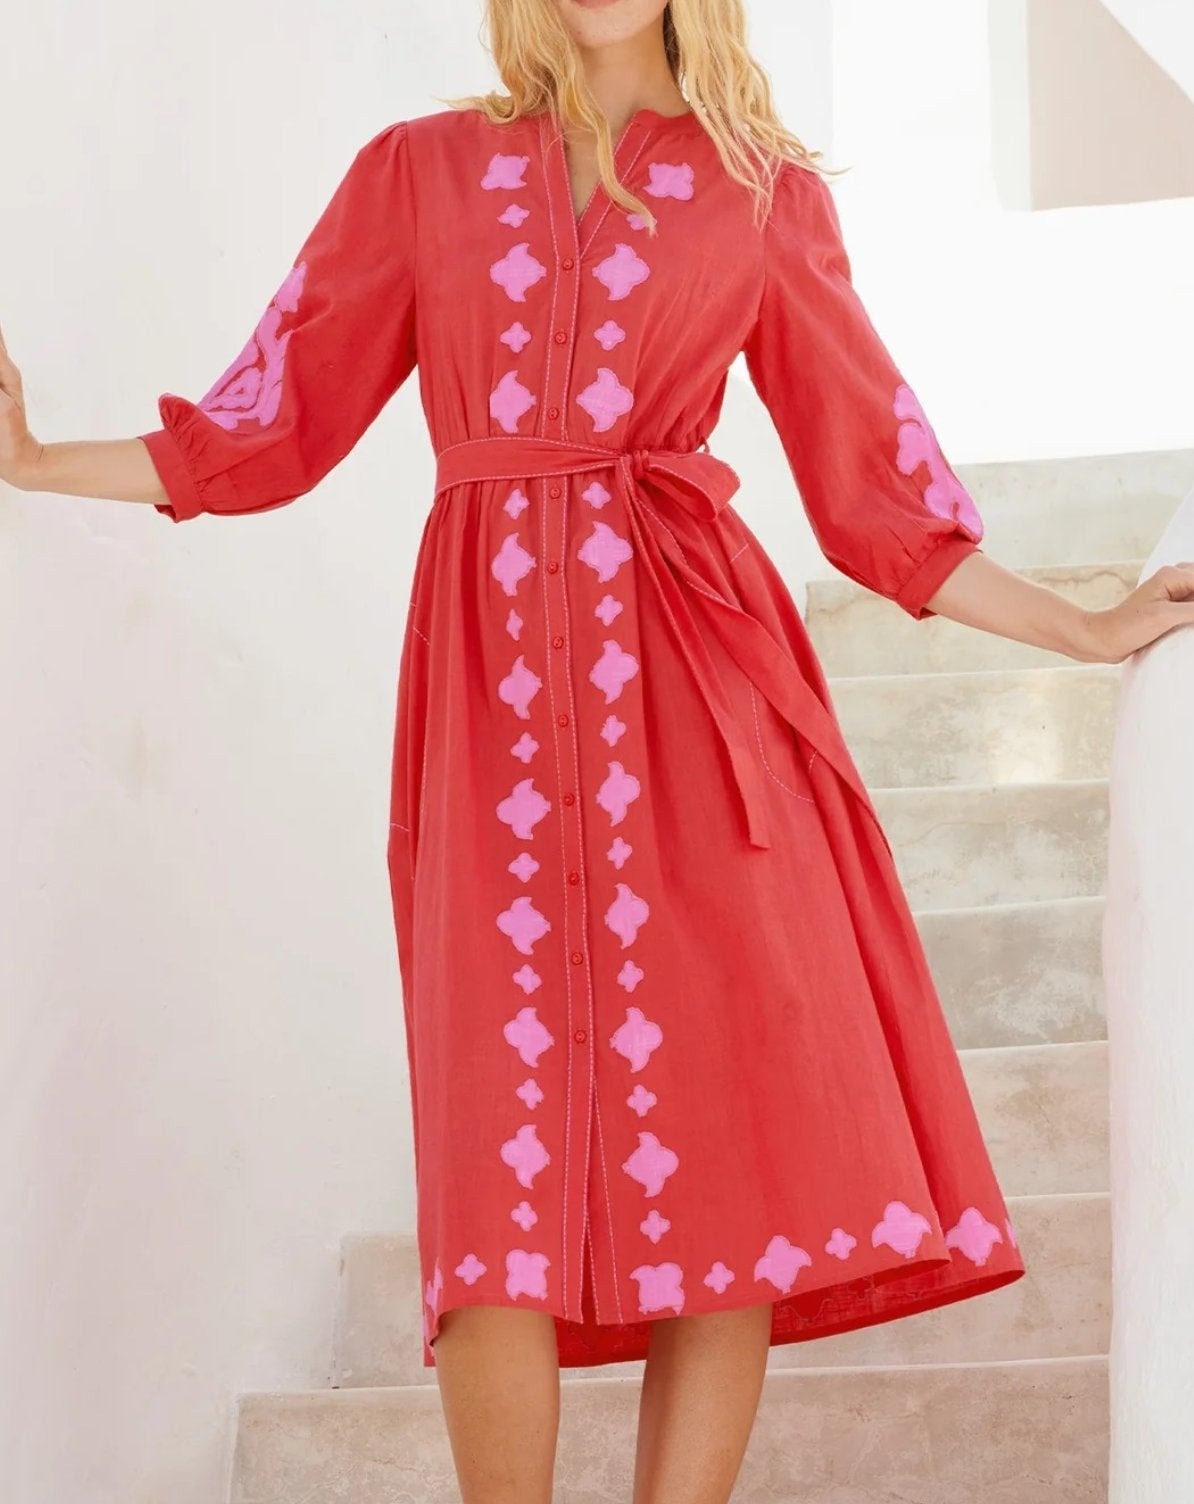 Milly Applique Dress